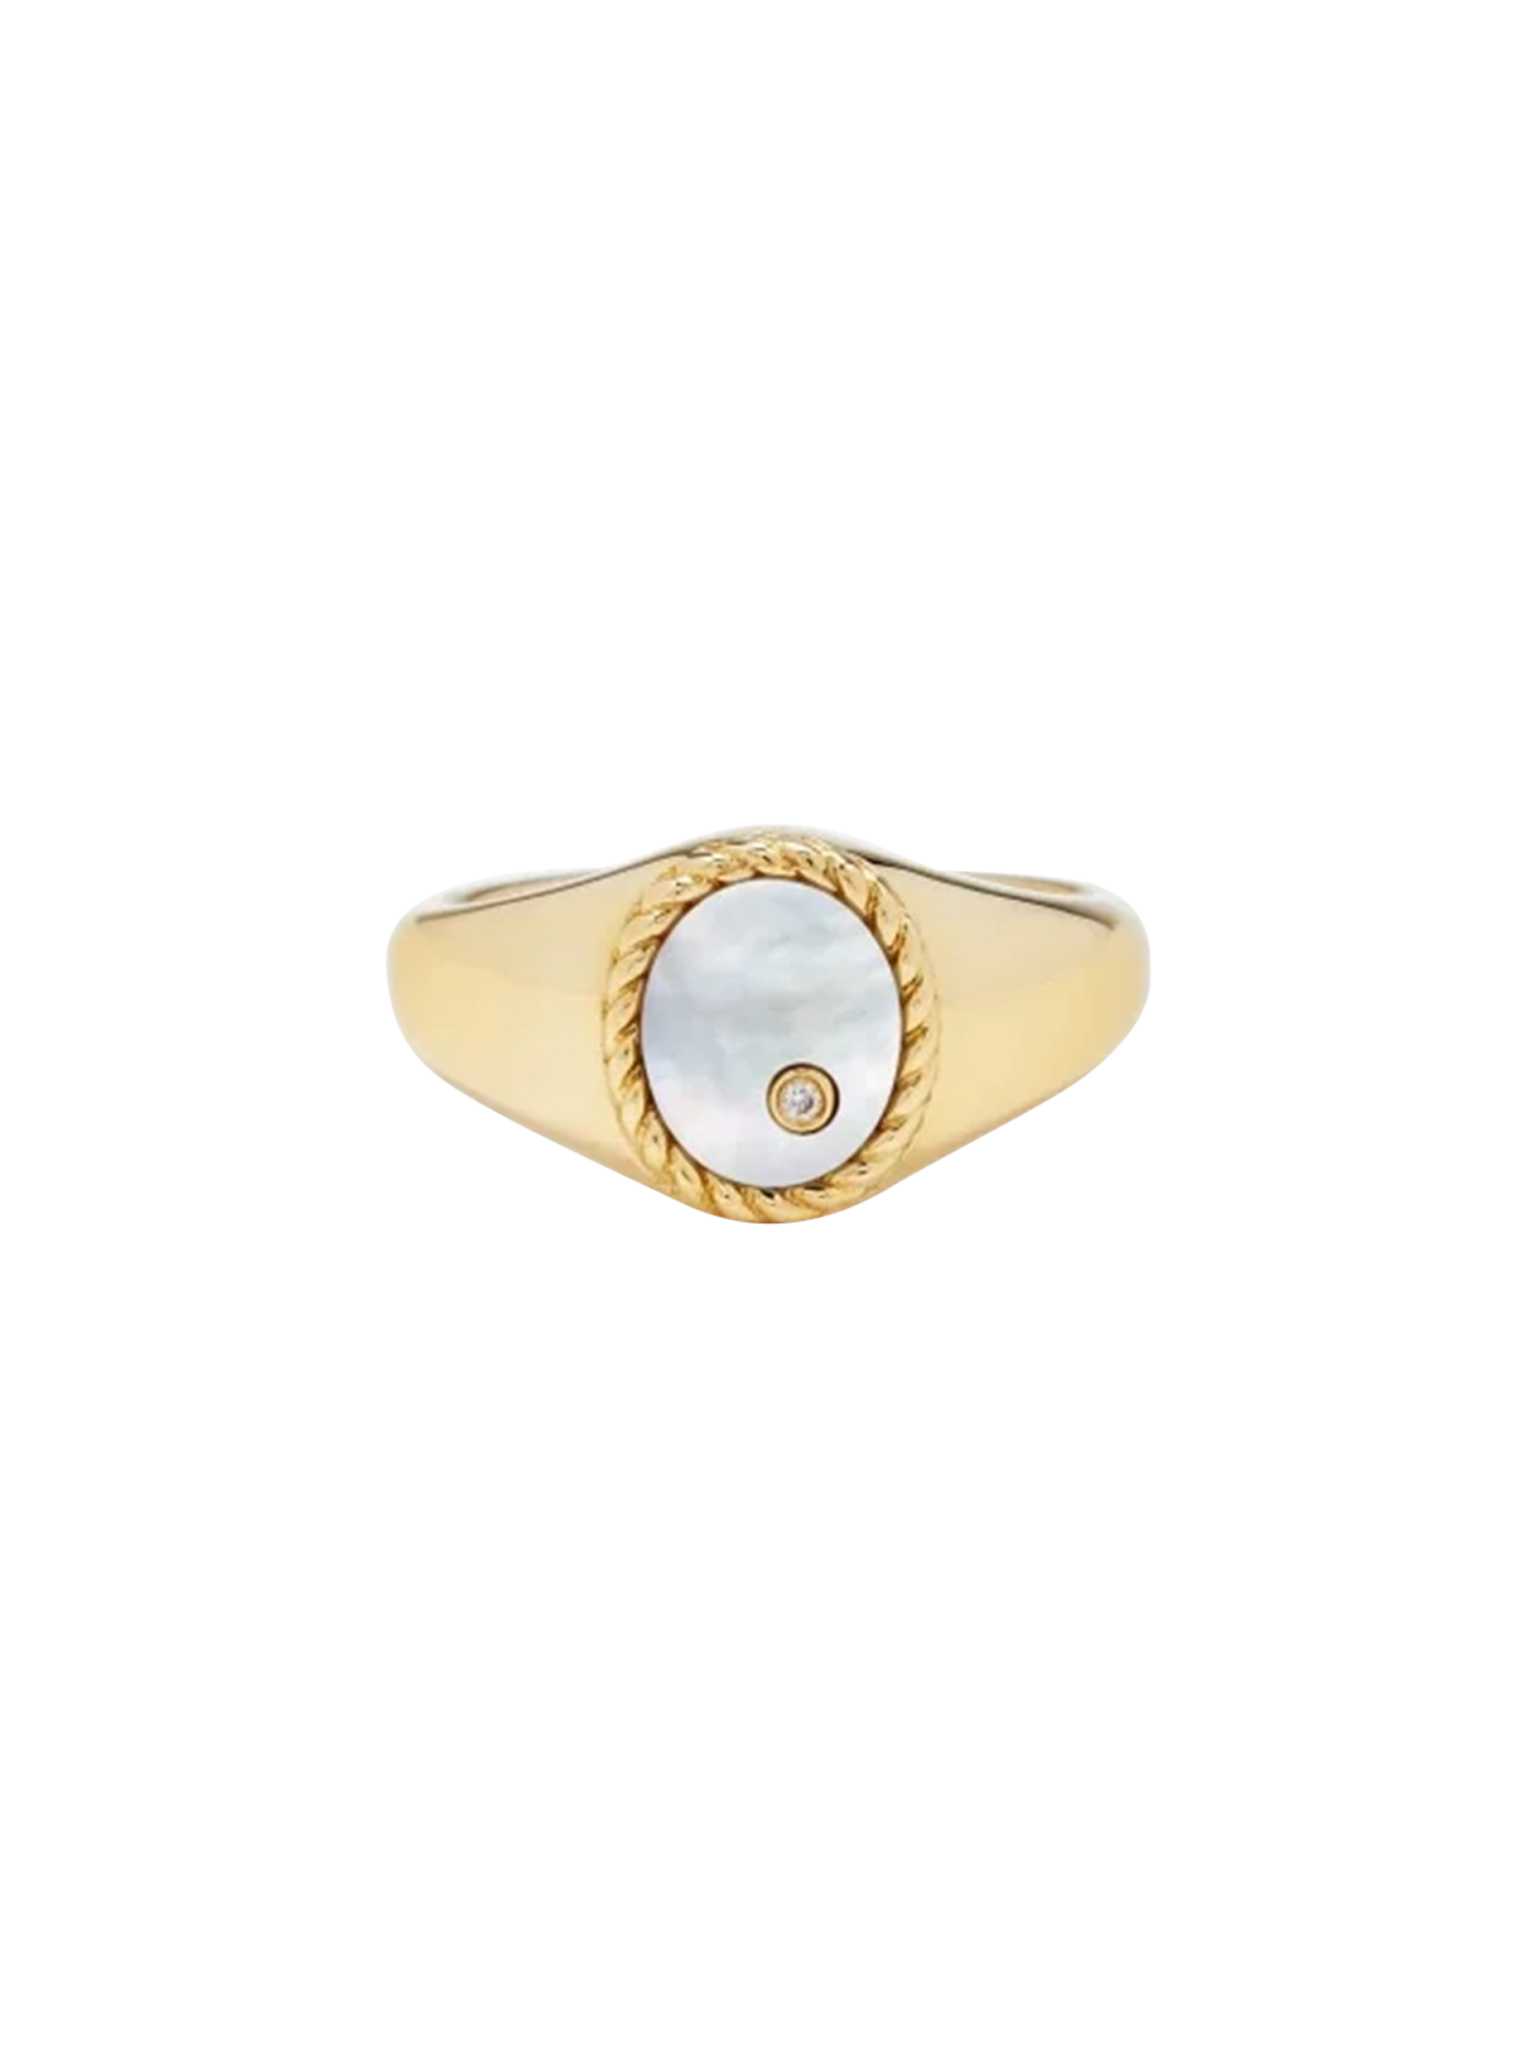 Baby chevalière ovale nacre or jaune ring